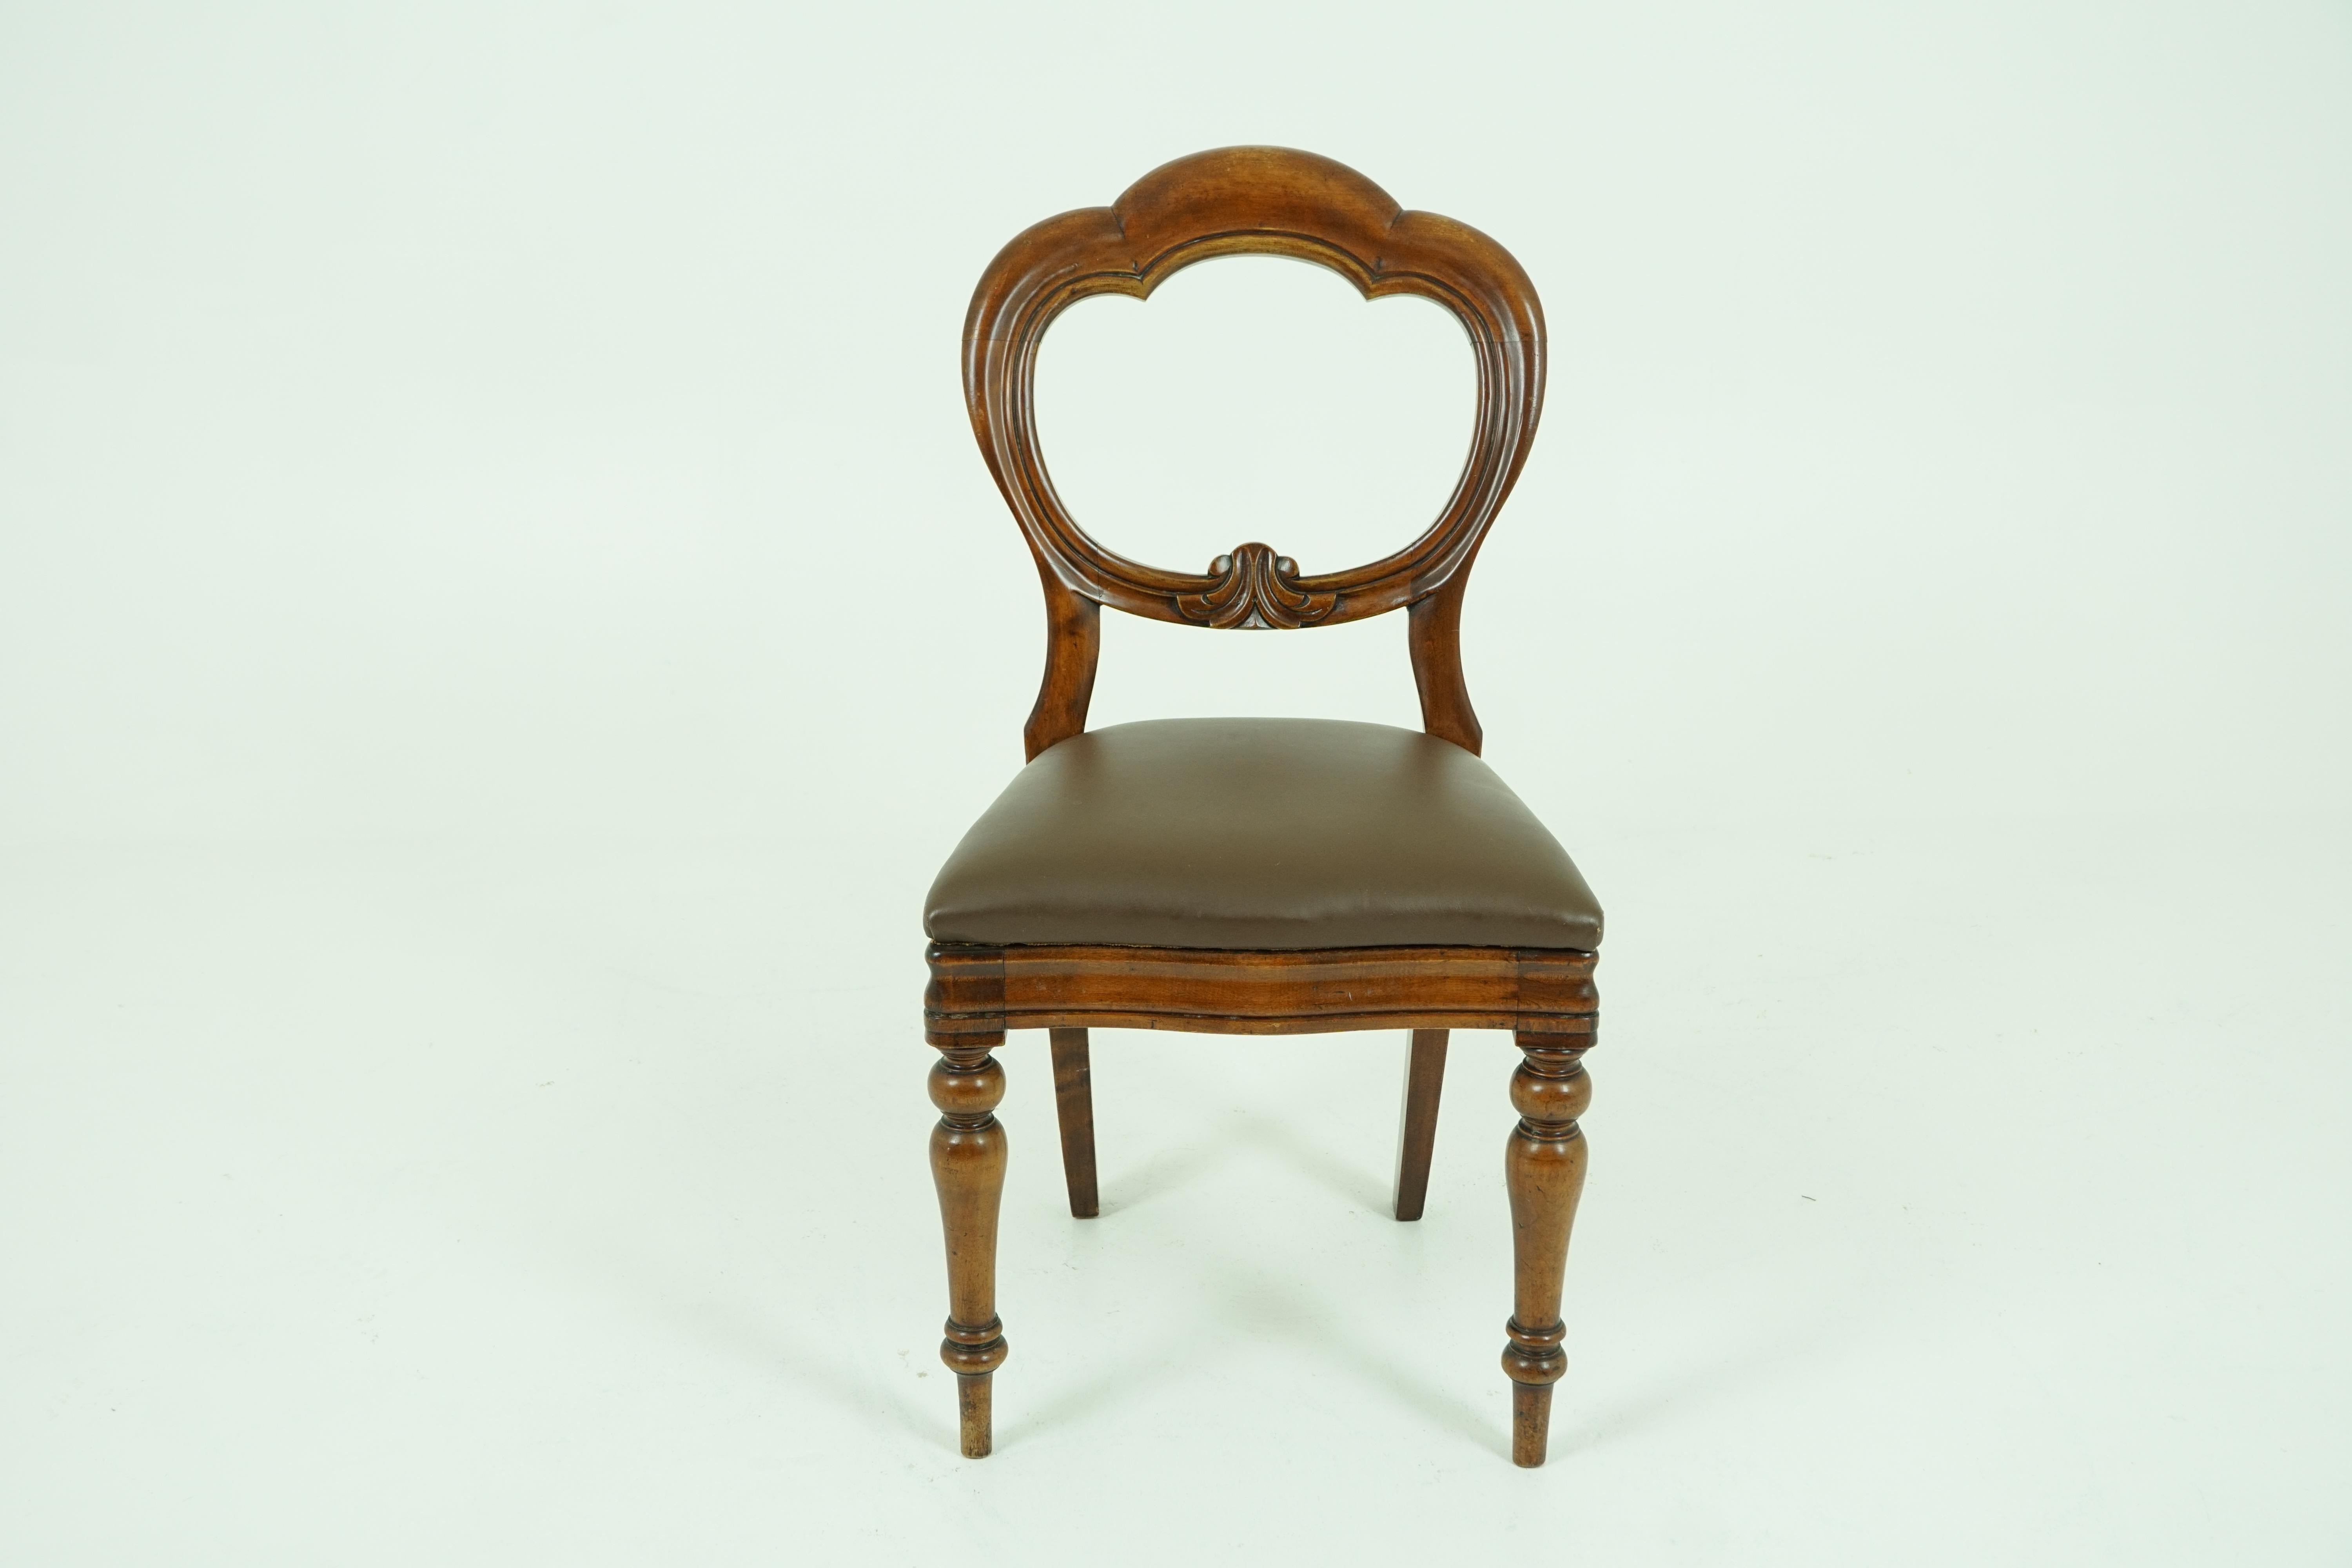 Four antique Victorian walnut balloon back dining chairs

Scotland 1880
Solid walnut
Original finish
Shaped balloon back
With carved lower rail
A serpentine lift out seat
Standing on lovely turned legs
Nice colour and warm patina
All